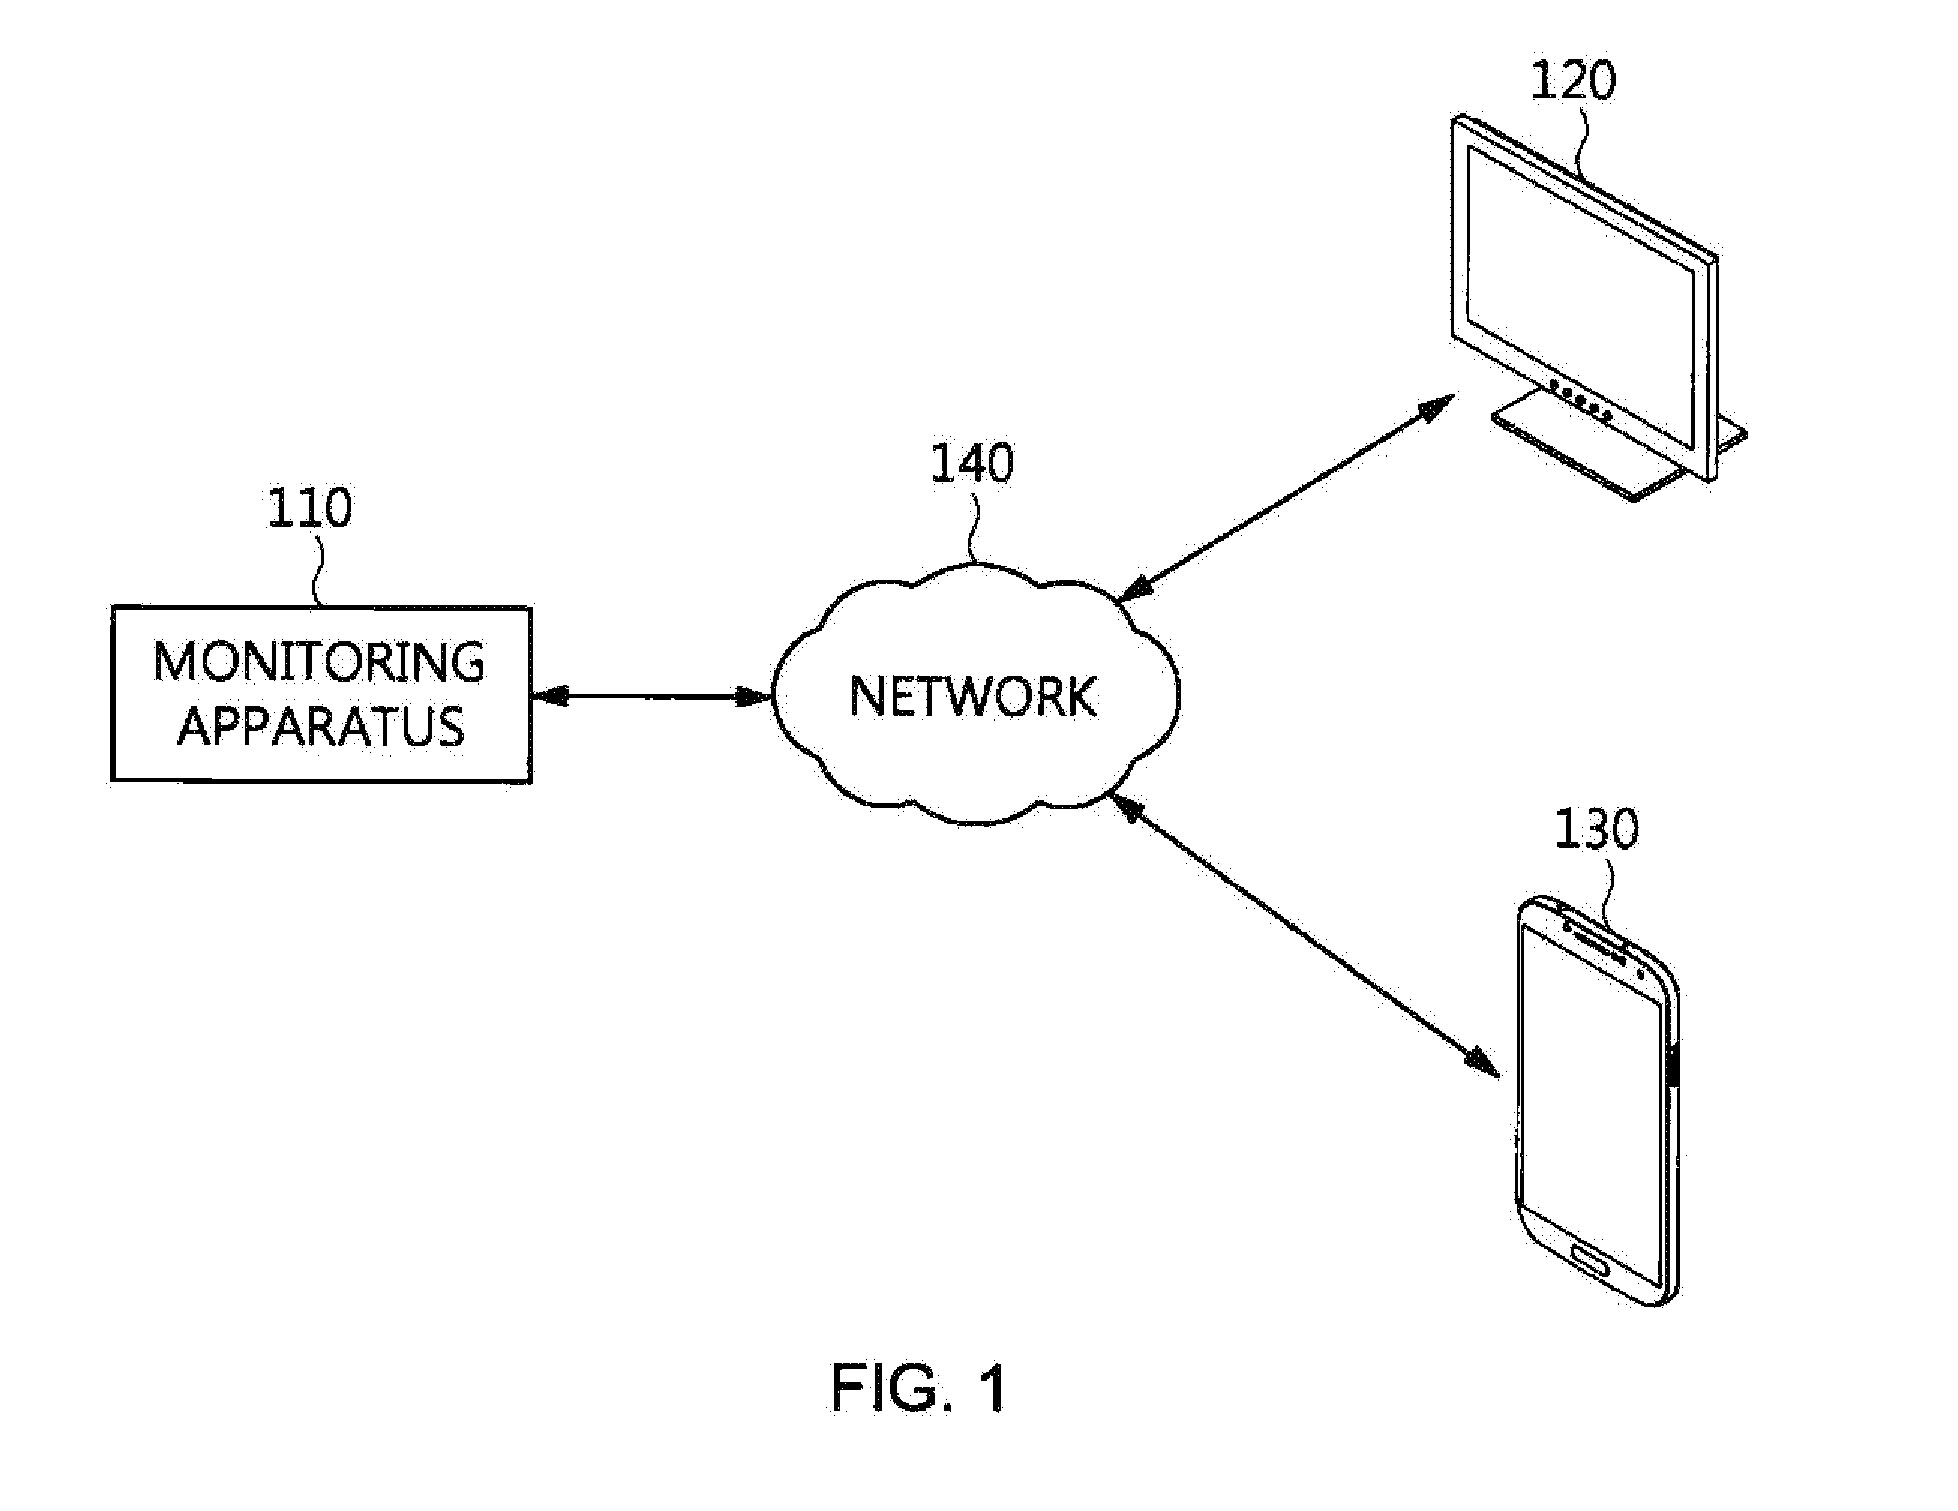 Apparatus and method for monitoring android platform-based application